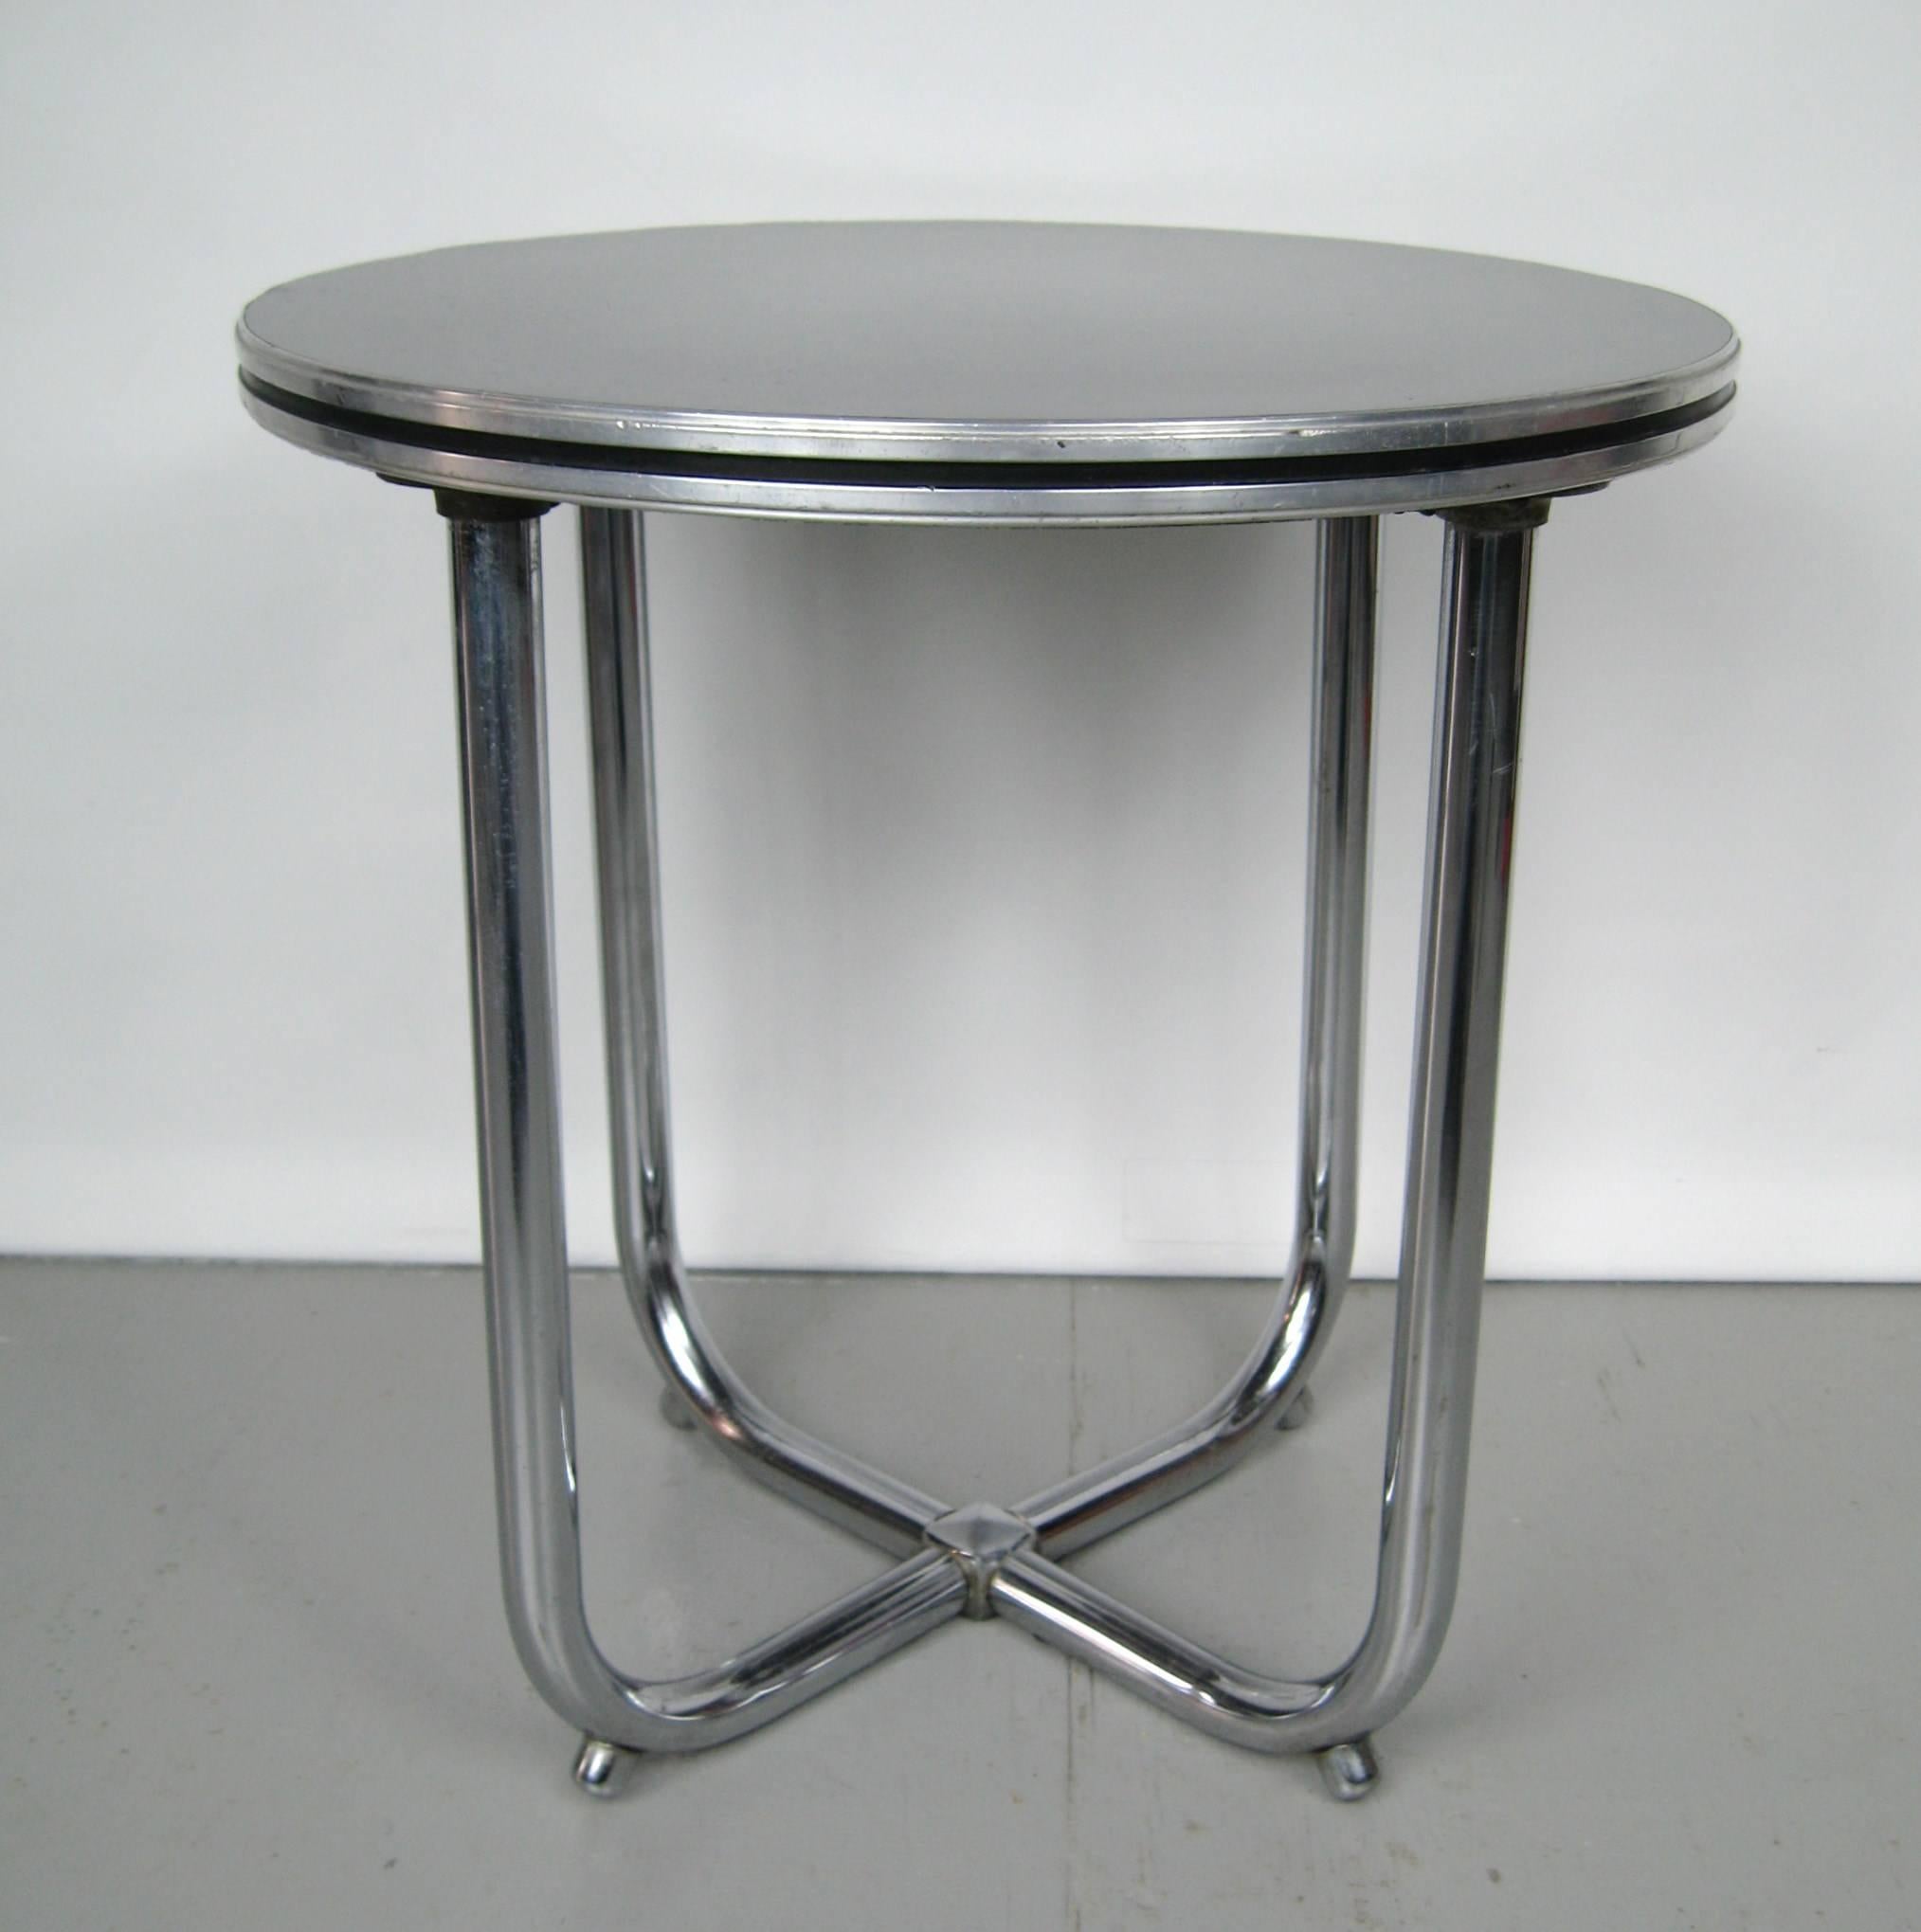 Wolfgang Hoffmann Art Deco chrome black side table. Another stunning Art Deco side or end table, chromed metal tubular U-shaped legs that meet at the floor to make an X-pattern. With black laminate Micarta top. Be sure to check our storefront for